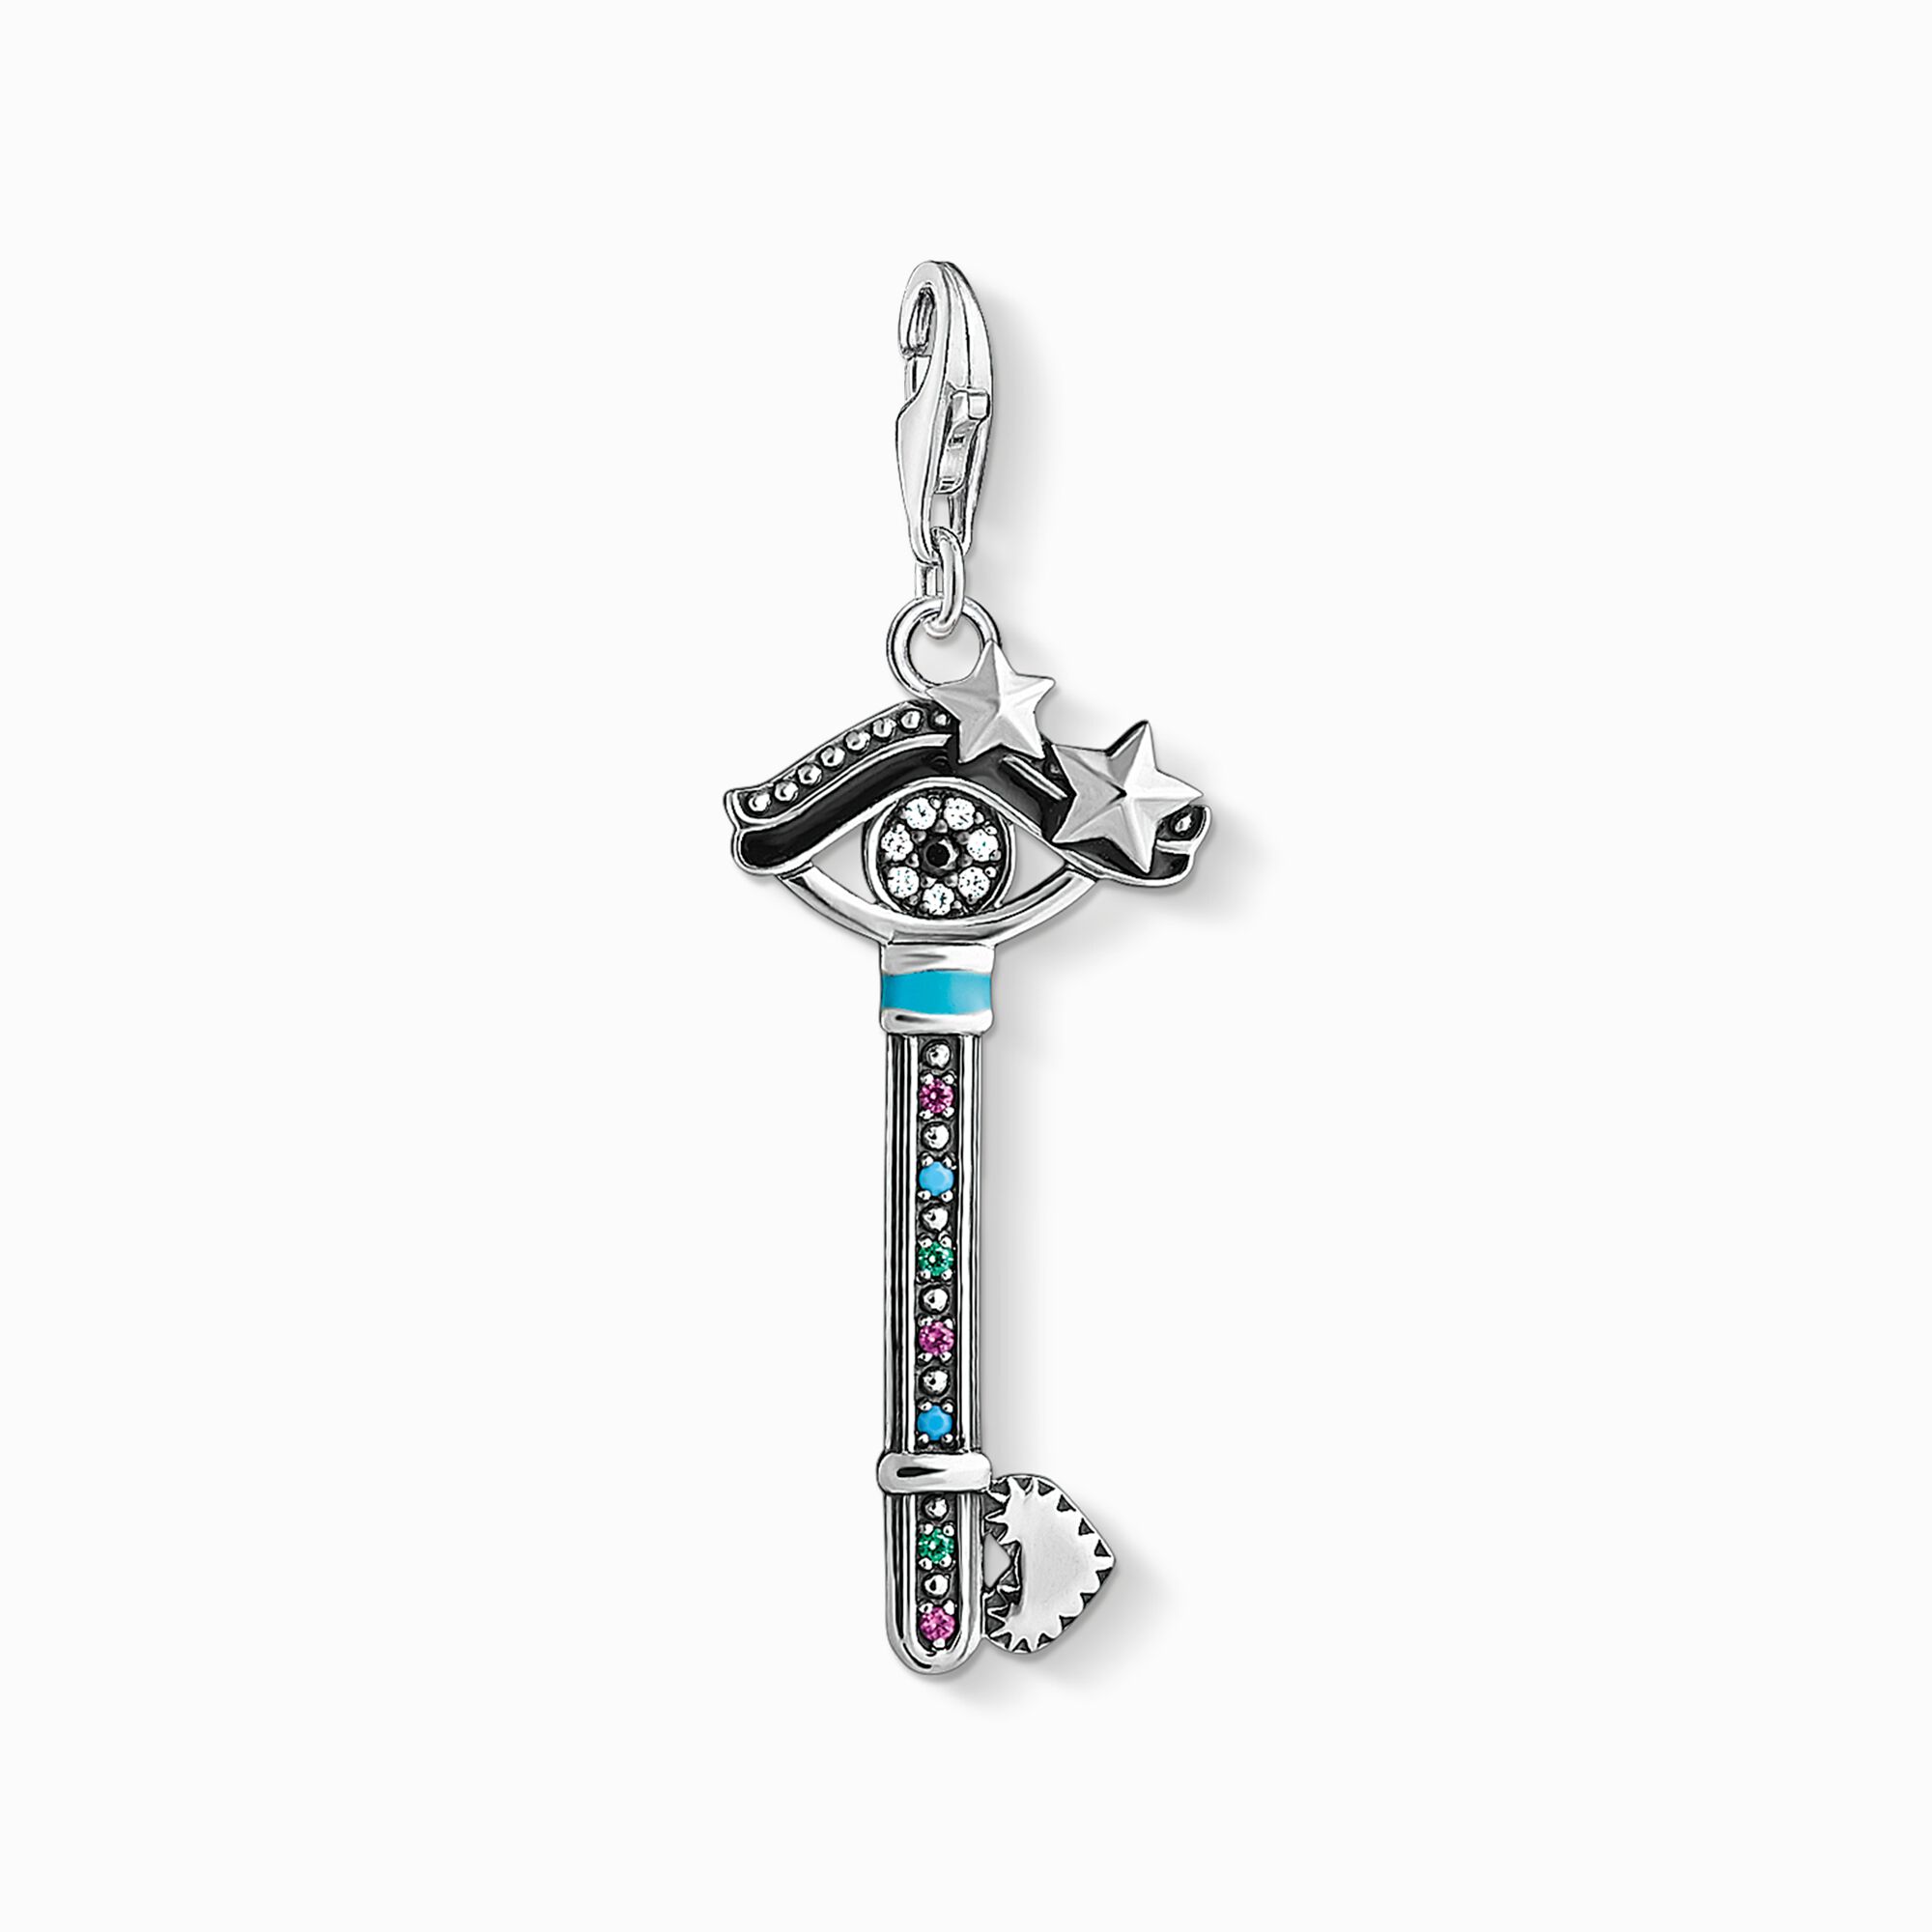 Charm pendant Key to the heart from the Charm Club collection in the THOMAS SABO online store